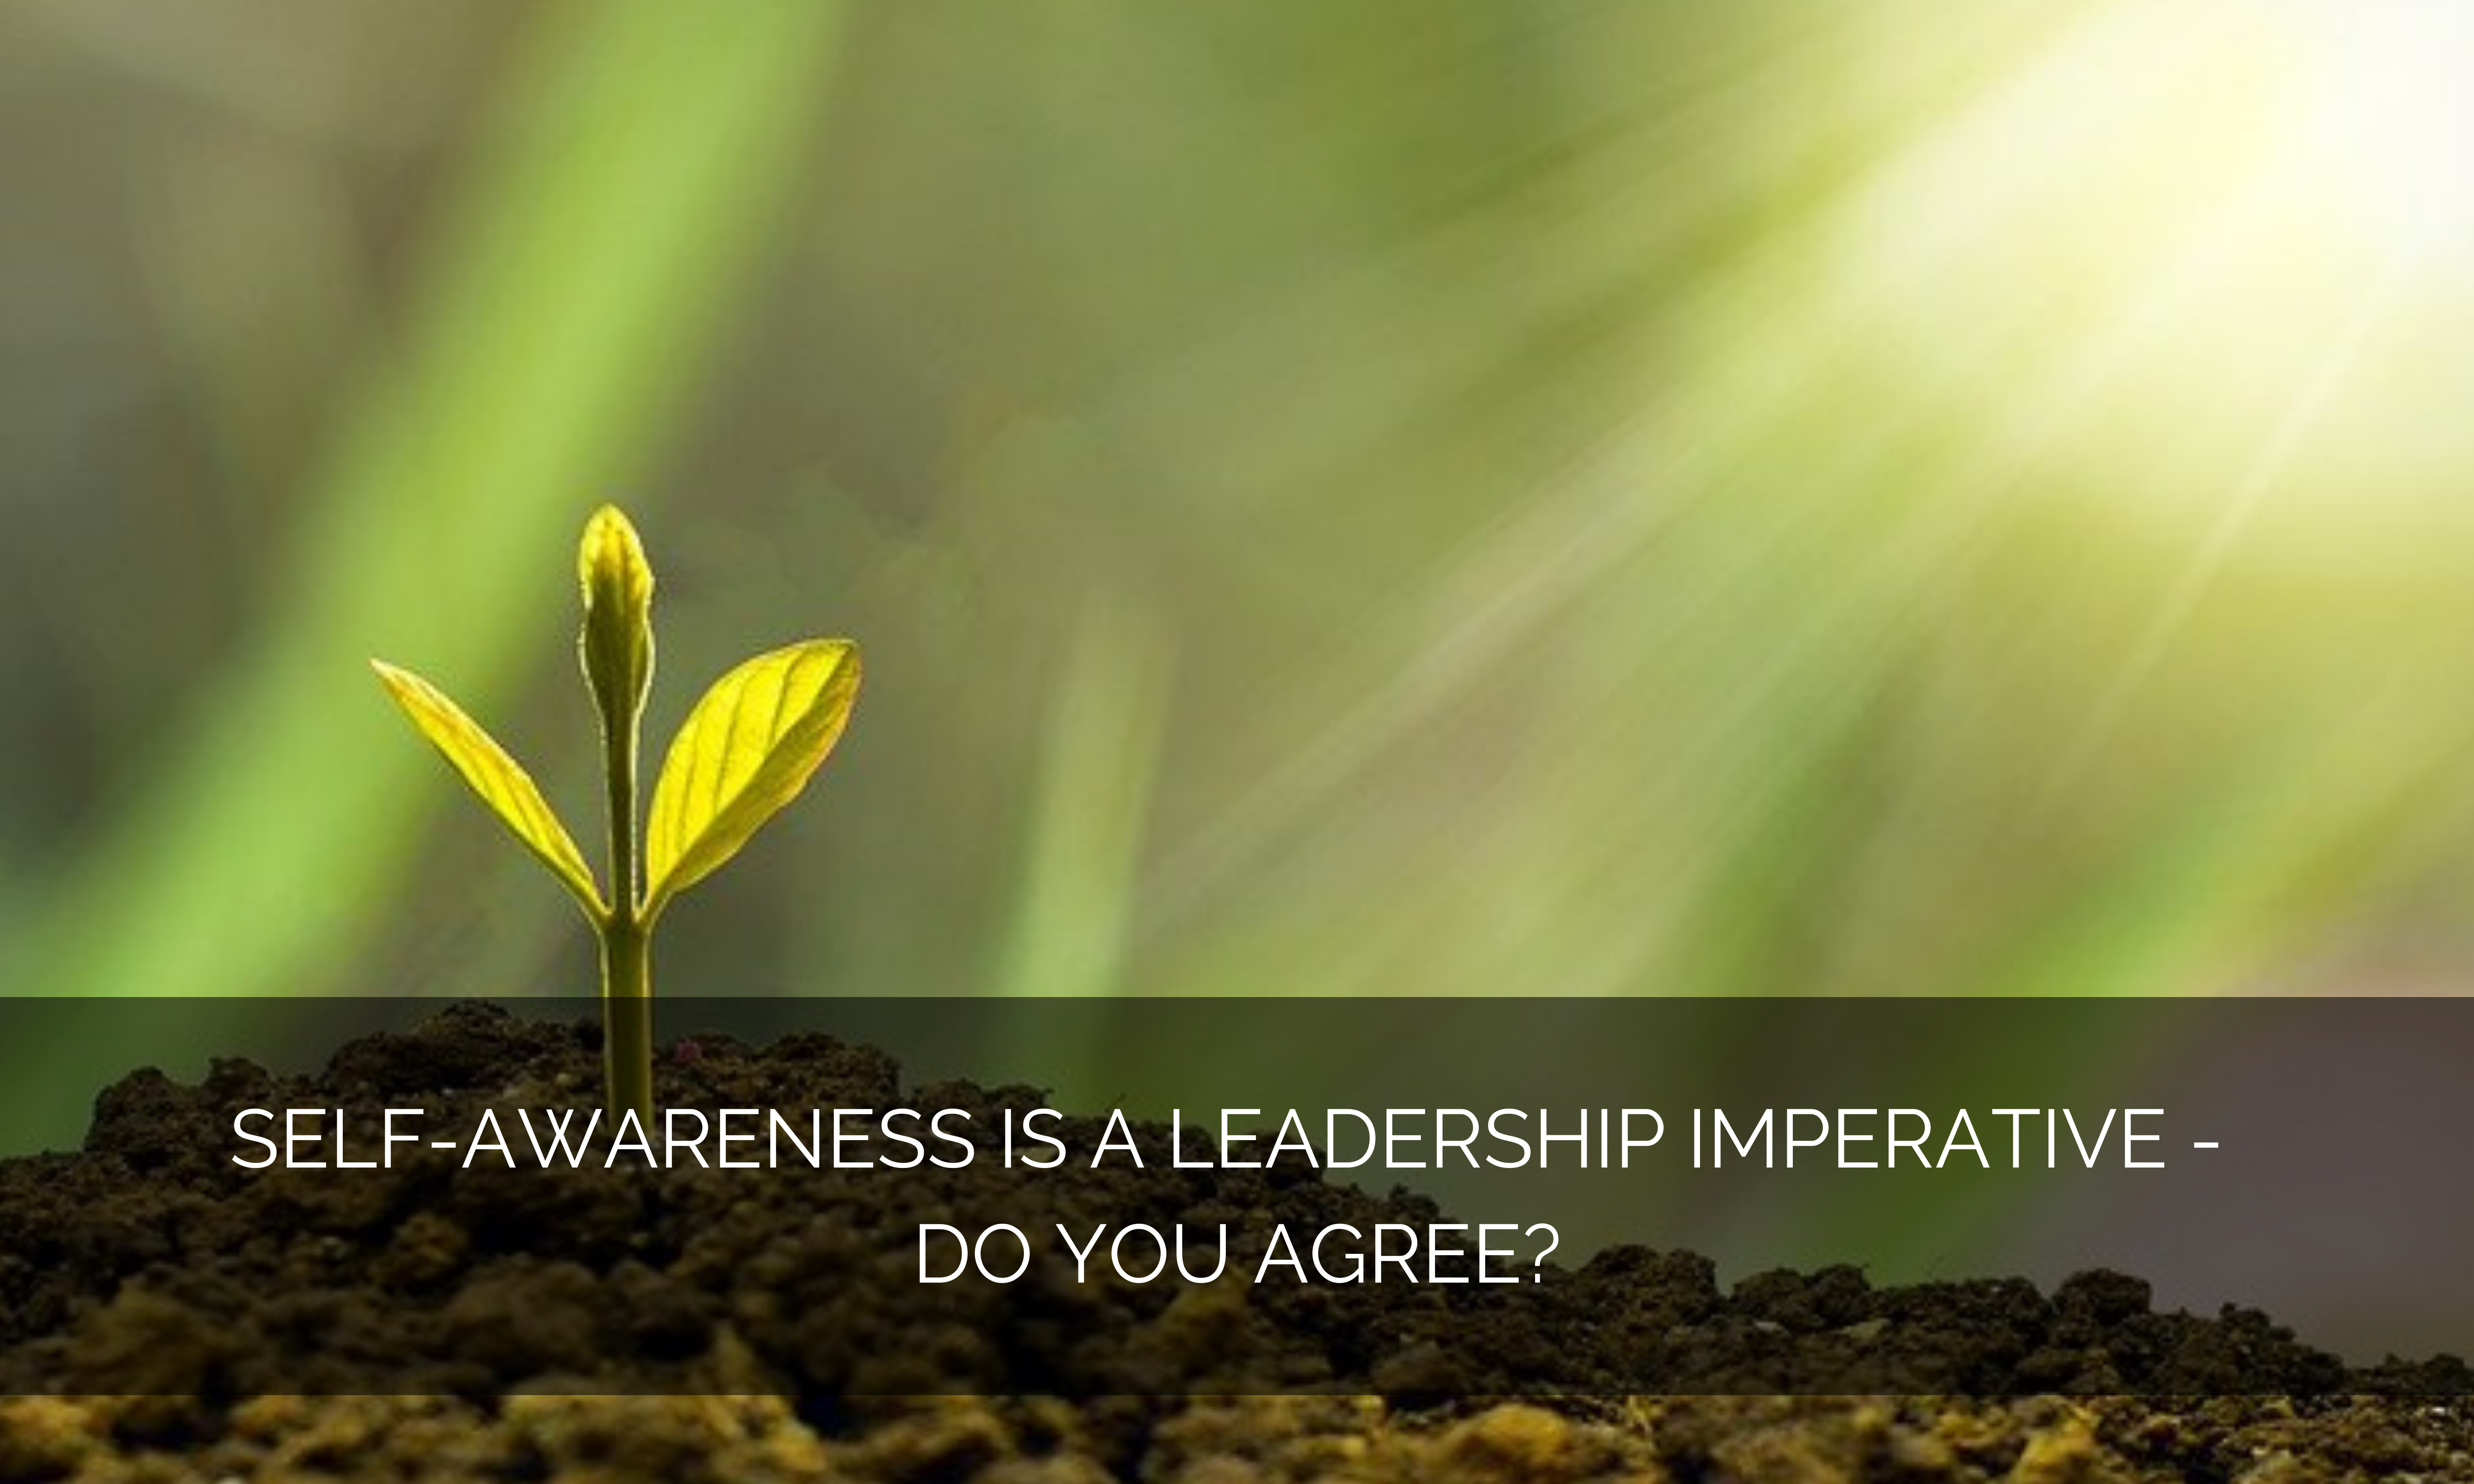 Self-awareness is a leadership imperative – Do you agree?